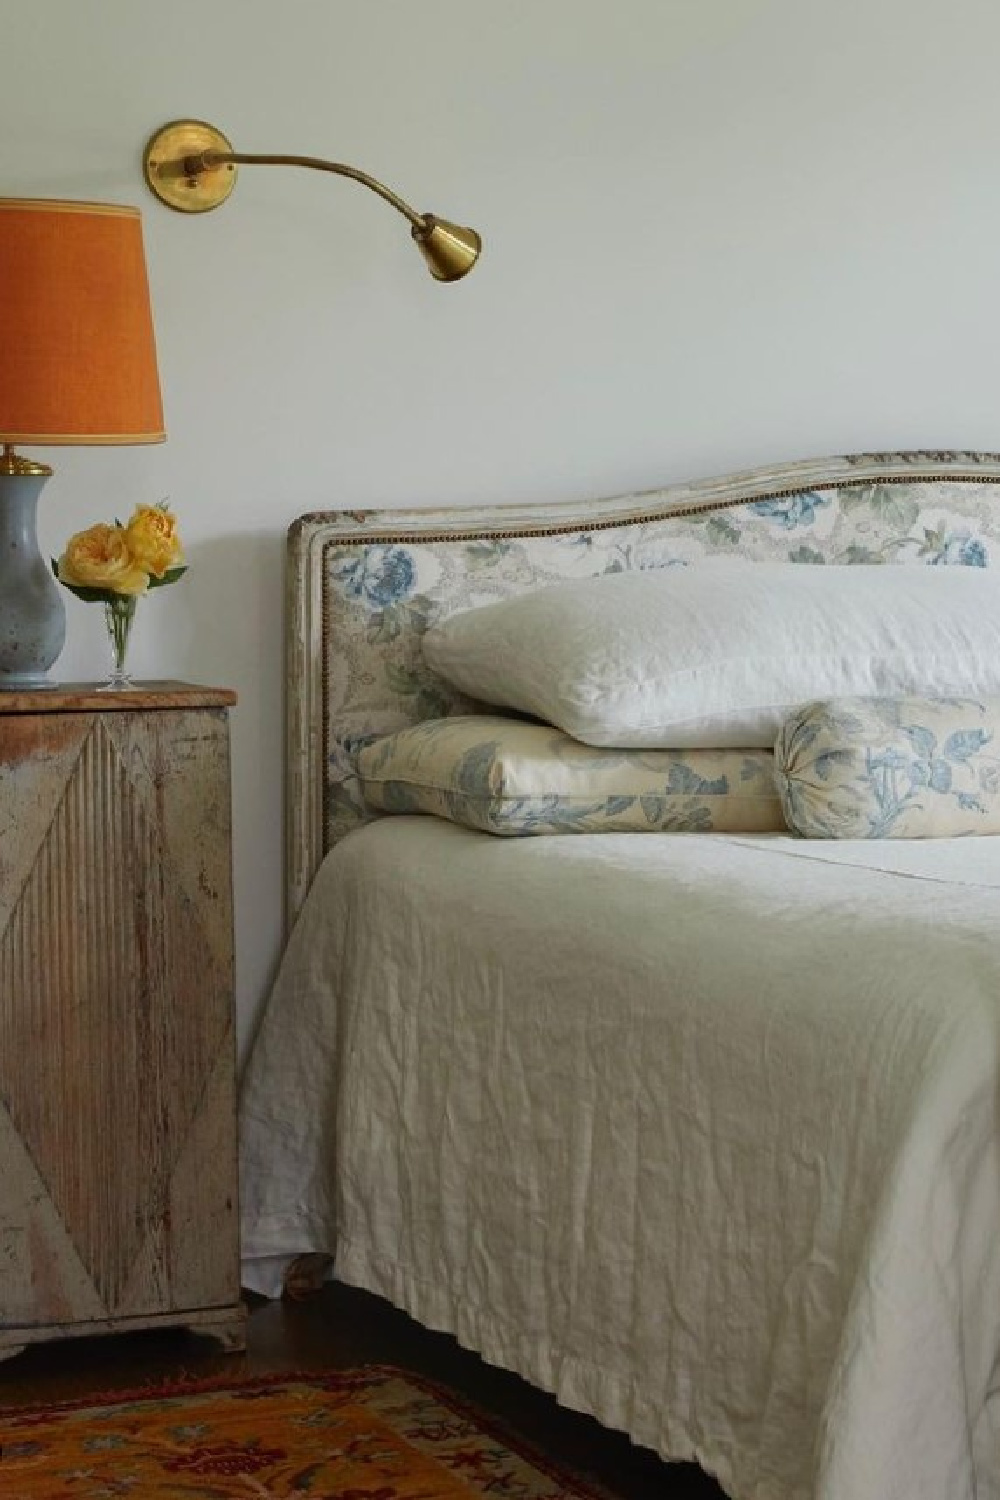 Serene bedroom with blue and peach. Timeless interior design by Shannon Bowers with nods to European antiques, patina, understated elegance, and sophisticated simplicity. #shannonbowers #timelessinteriors